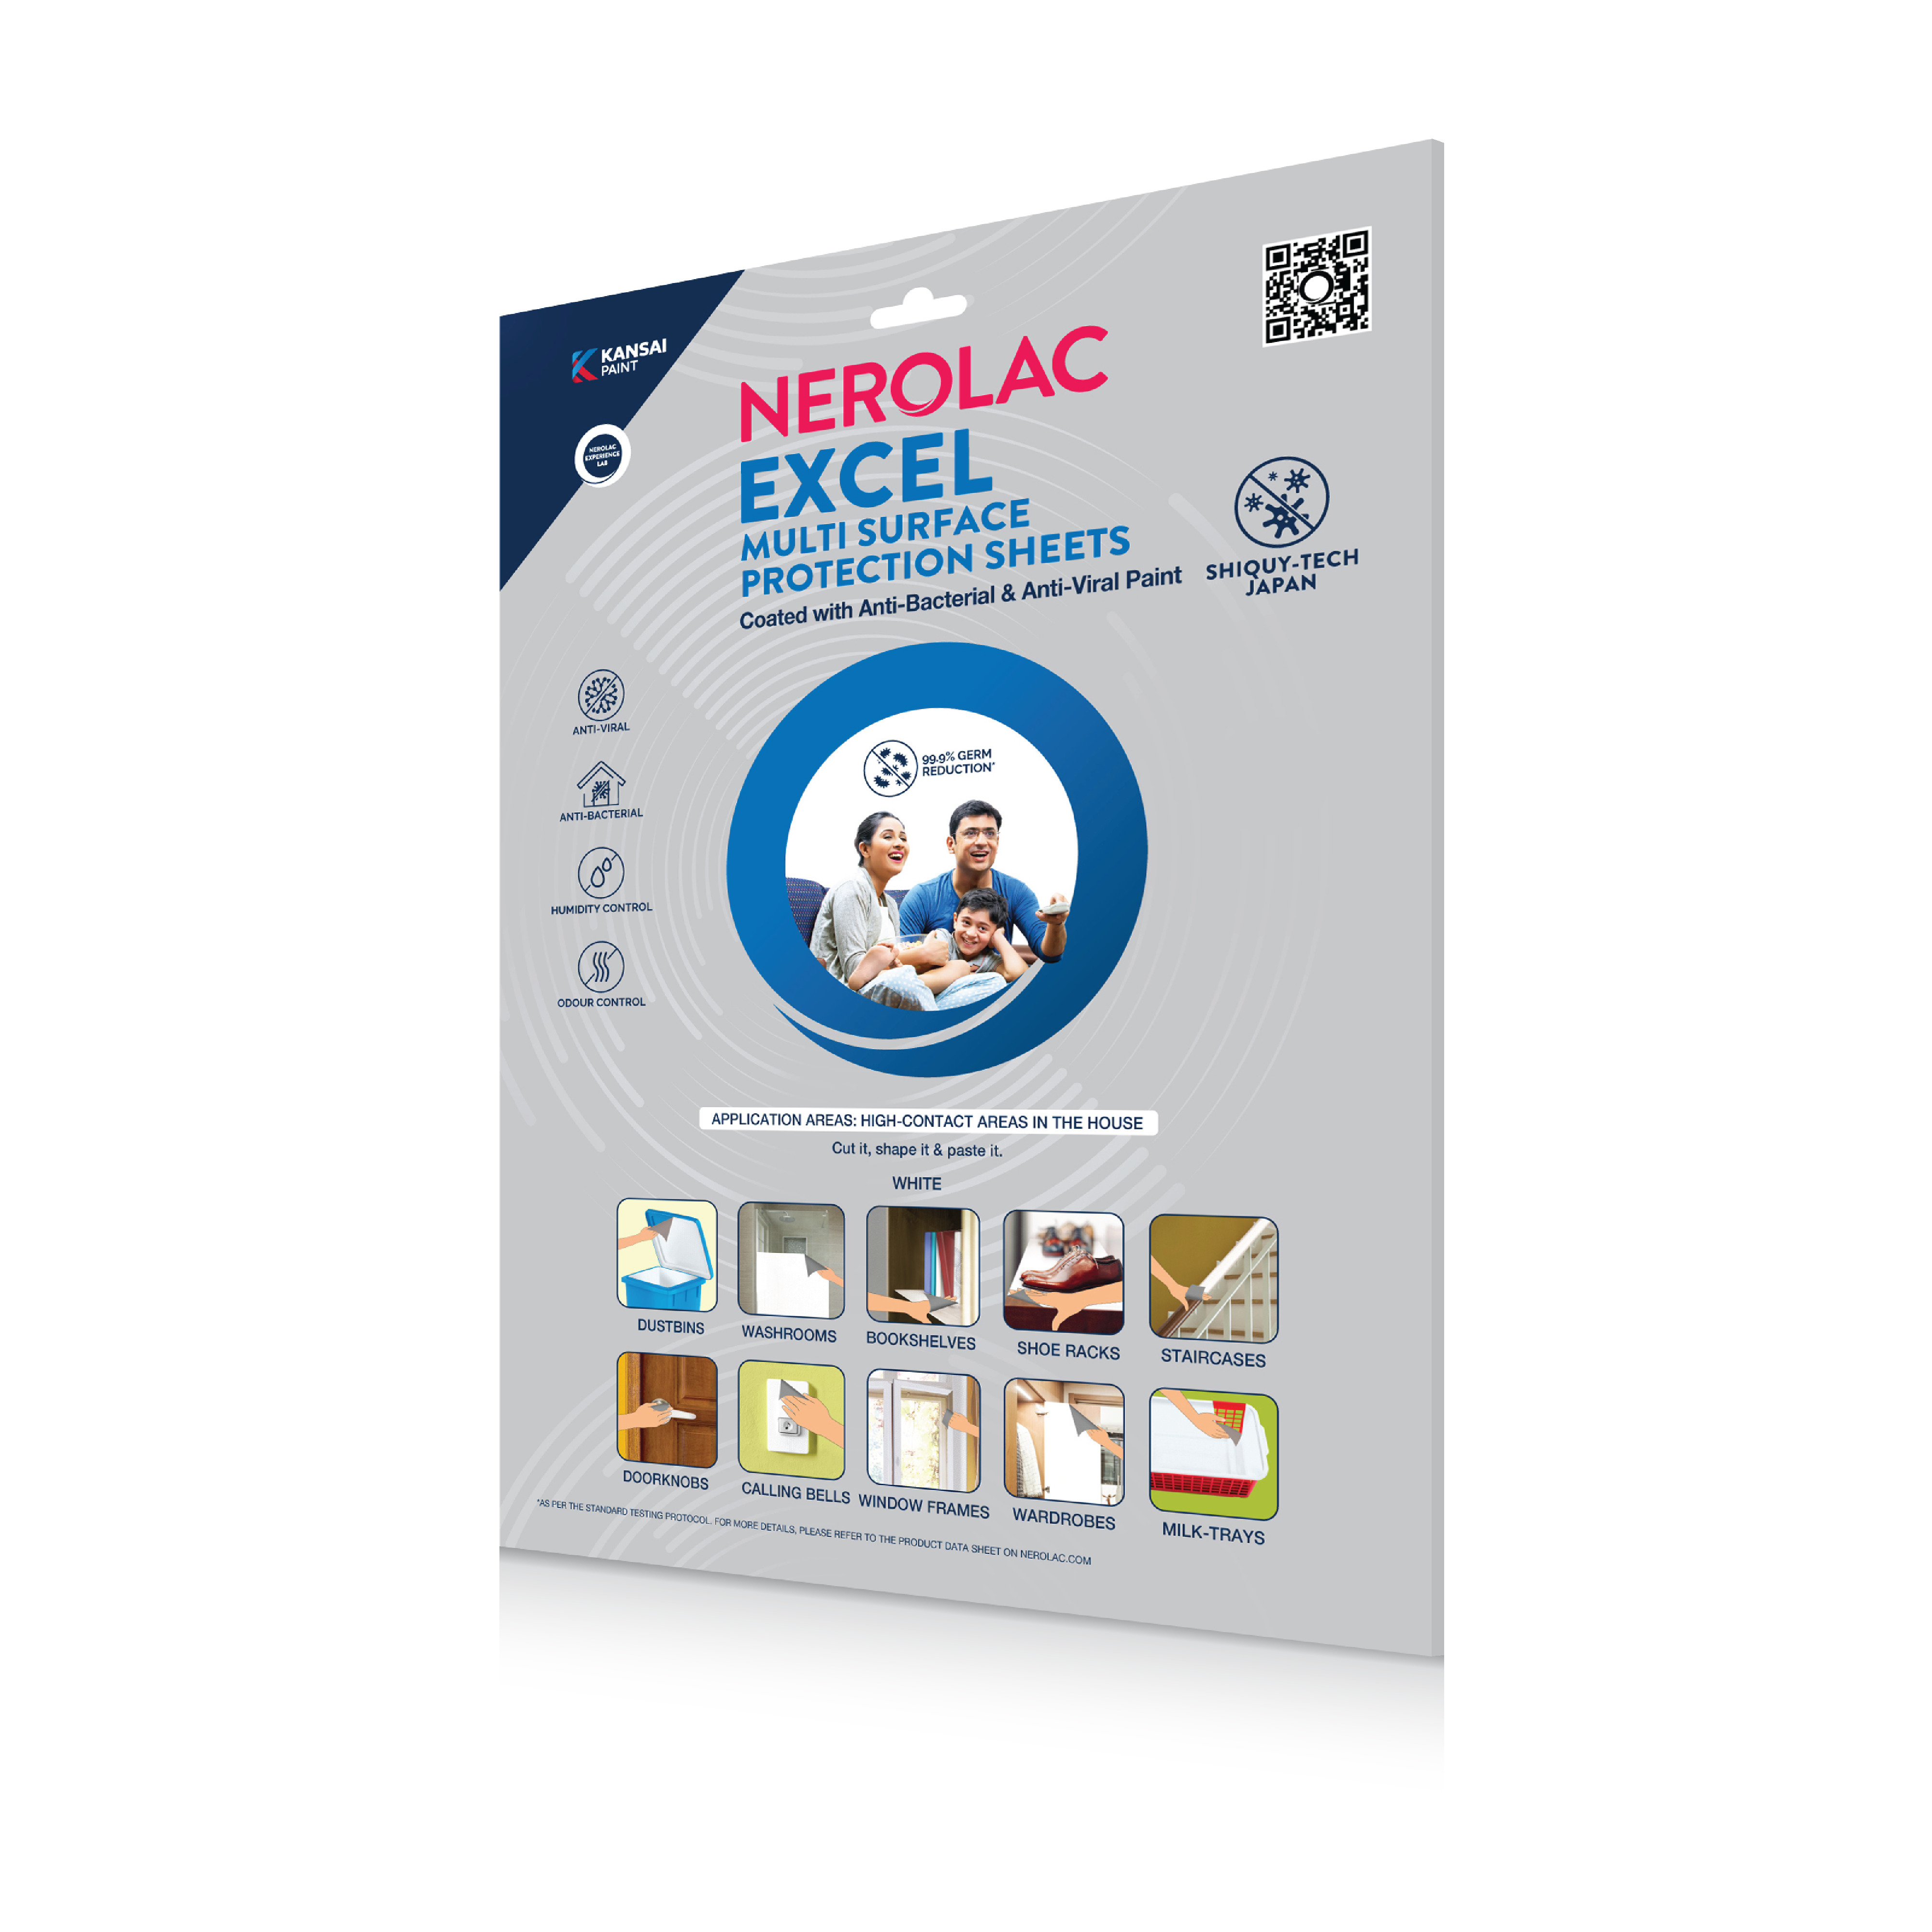 kansai-nerolac-paints-announces-the-launch-of-nerolac-excel-multi-surface-protection-sheets